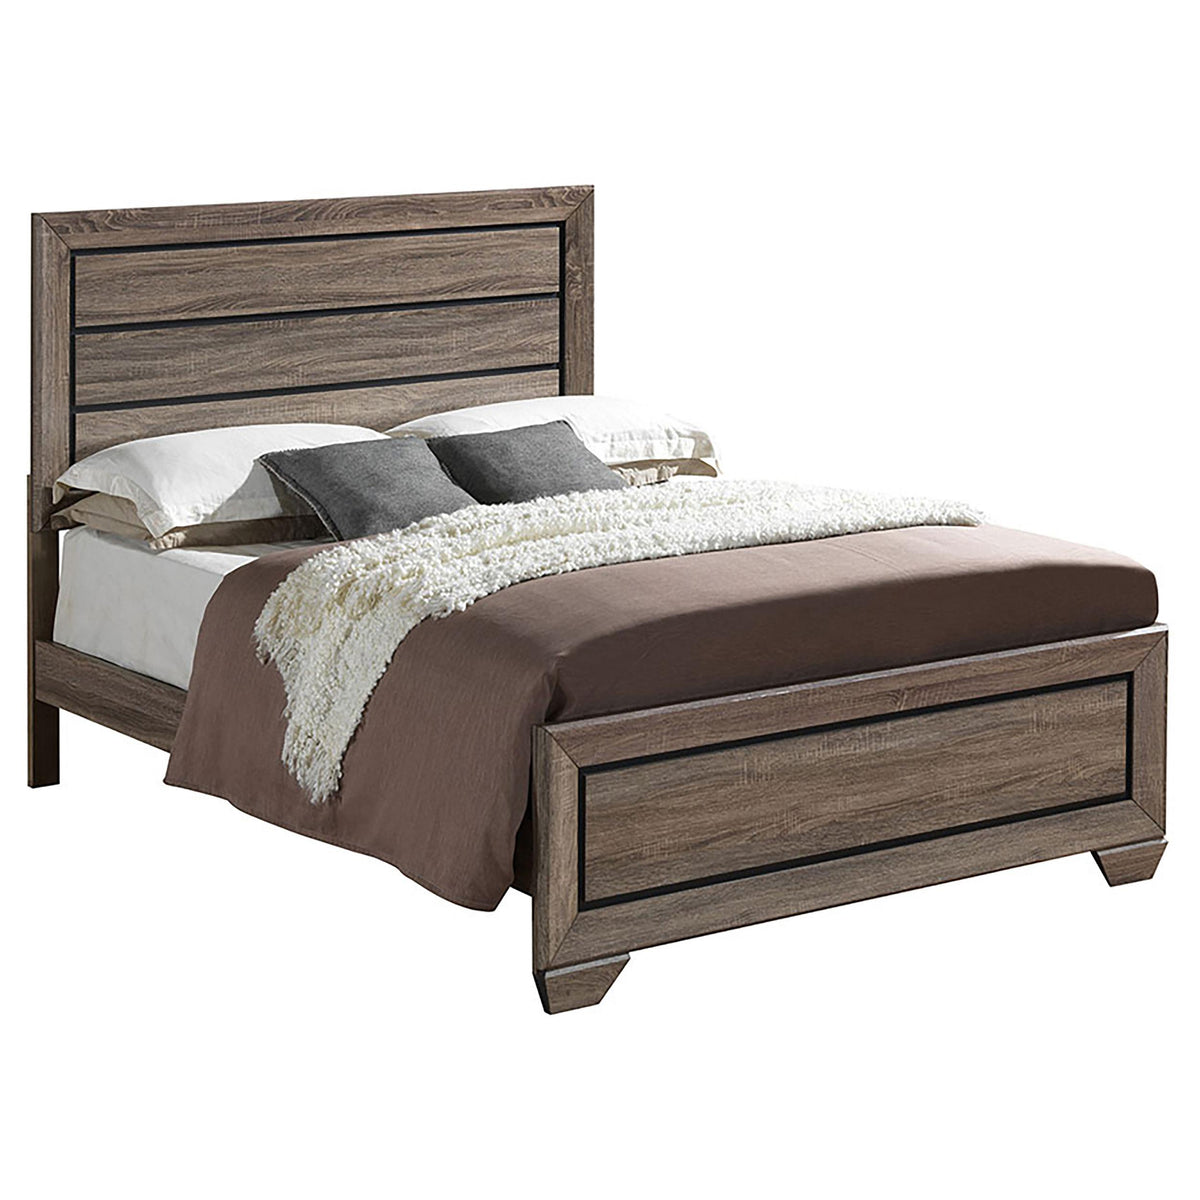 Kauffman Queen Panel Bed Washed Taupe Kauffman Queen Panel Bed Washed Taupe Half Price Furniture